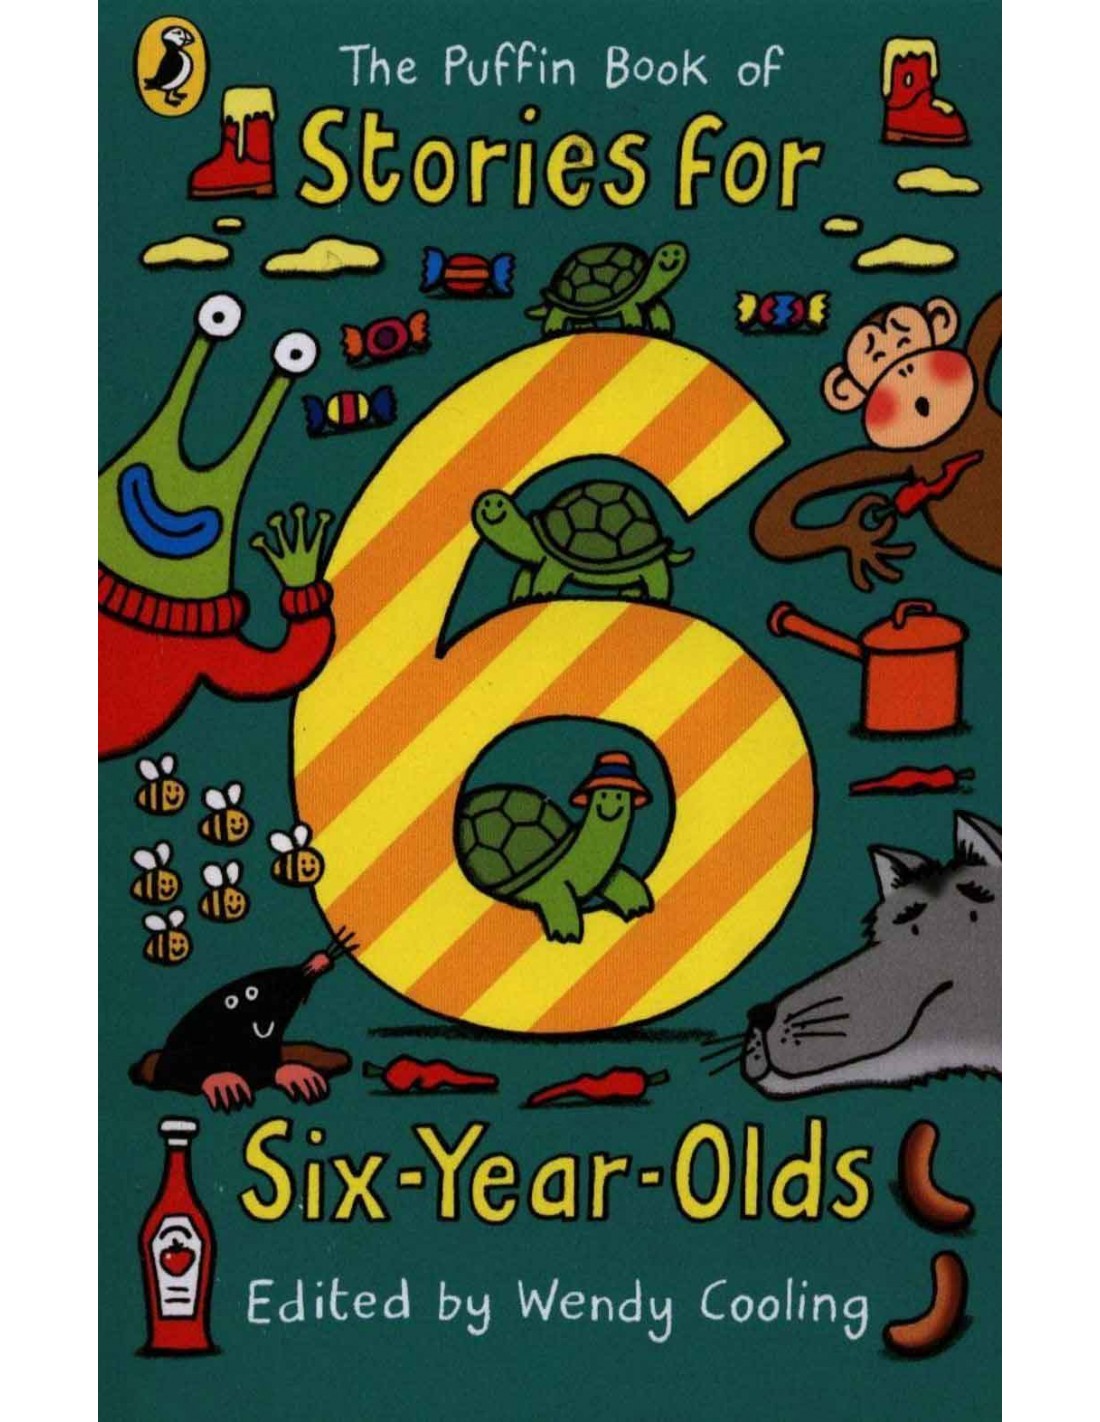 bedtime-stories-for-6-year-olds-online-shopping-save-48-jlcatj-gob-mx